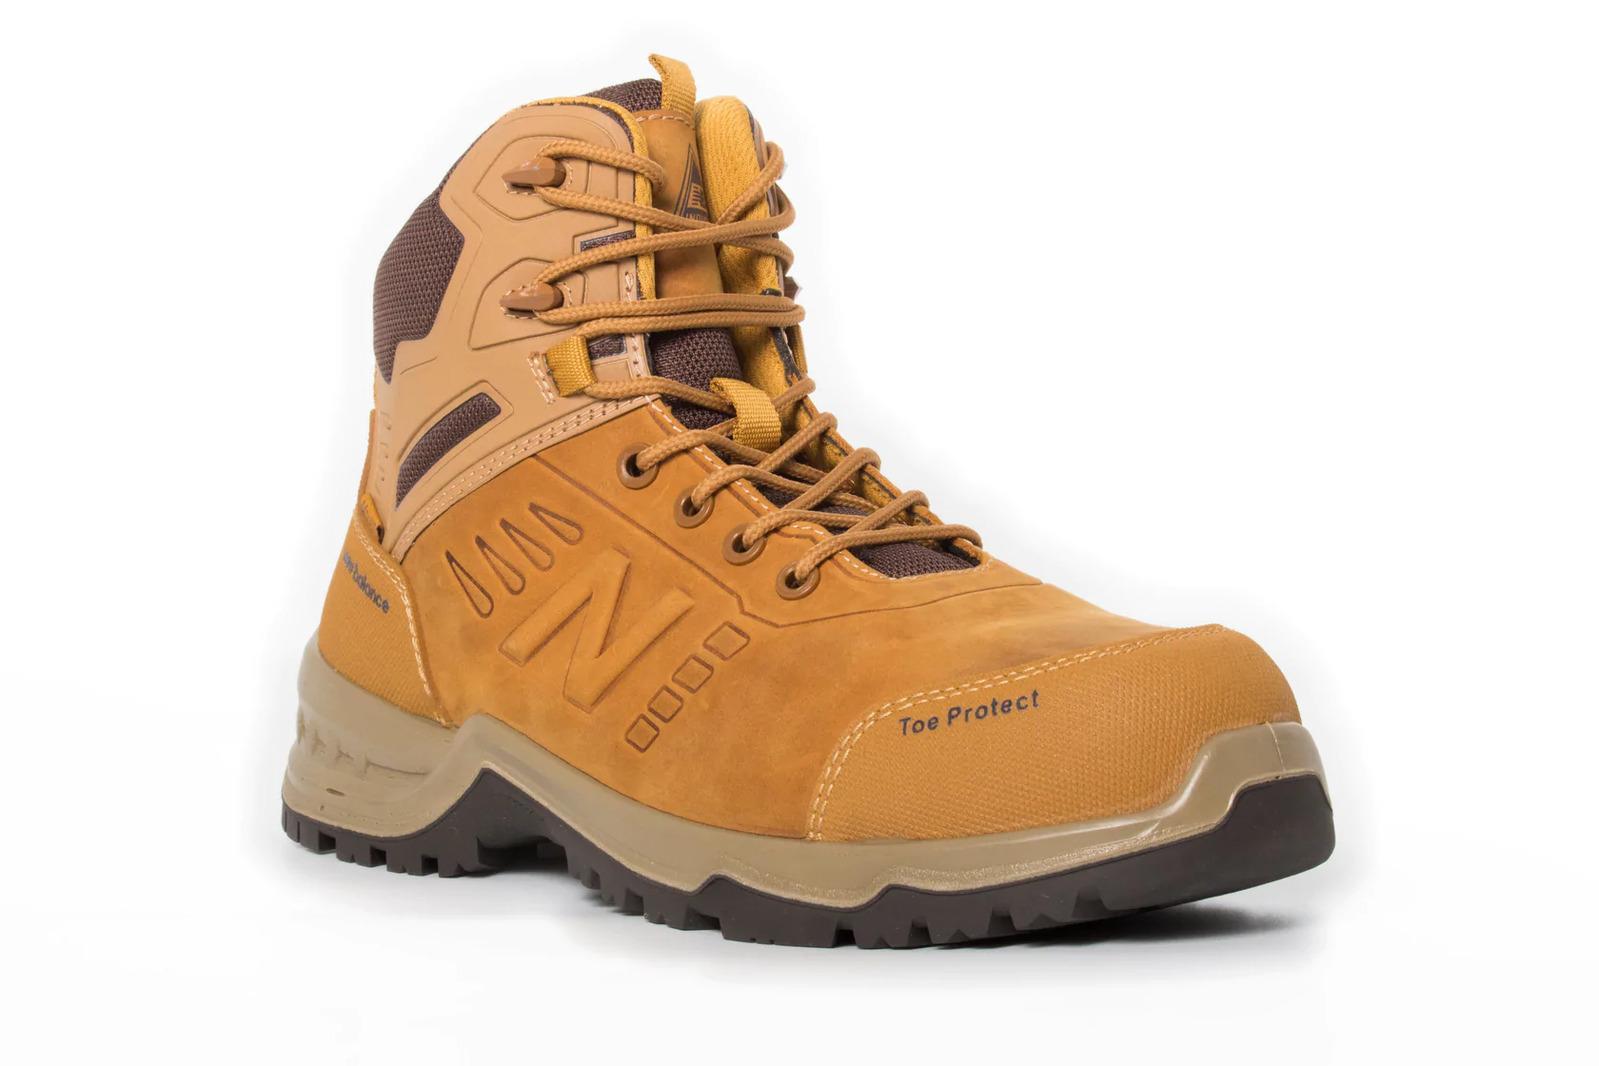 New Balance Mens Contour Steel Toe Cap Safety Work Boots with Zip - Wheat - US 13 Width:2E